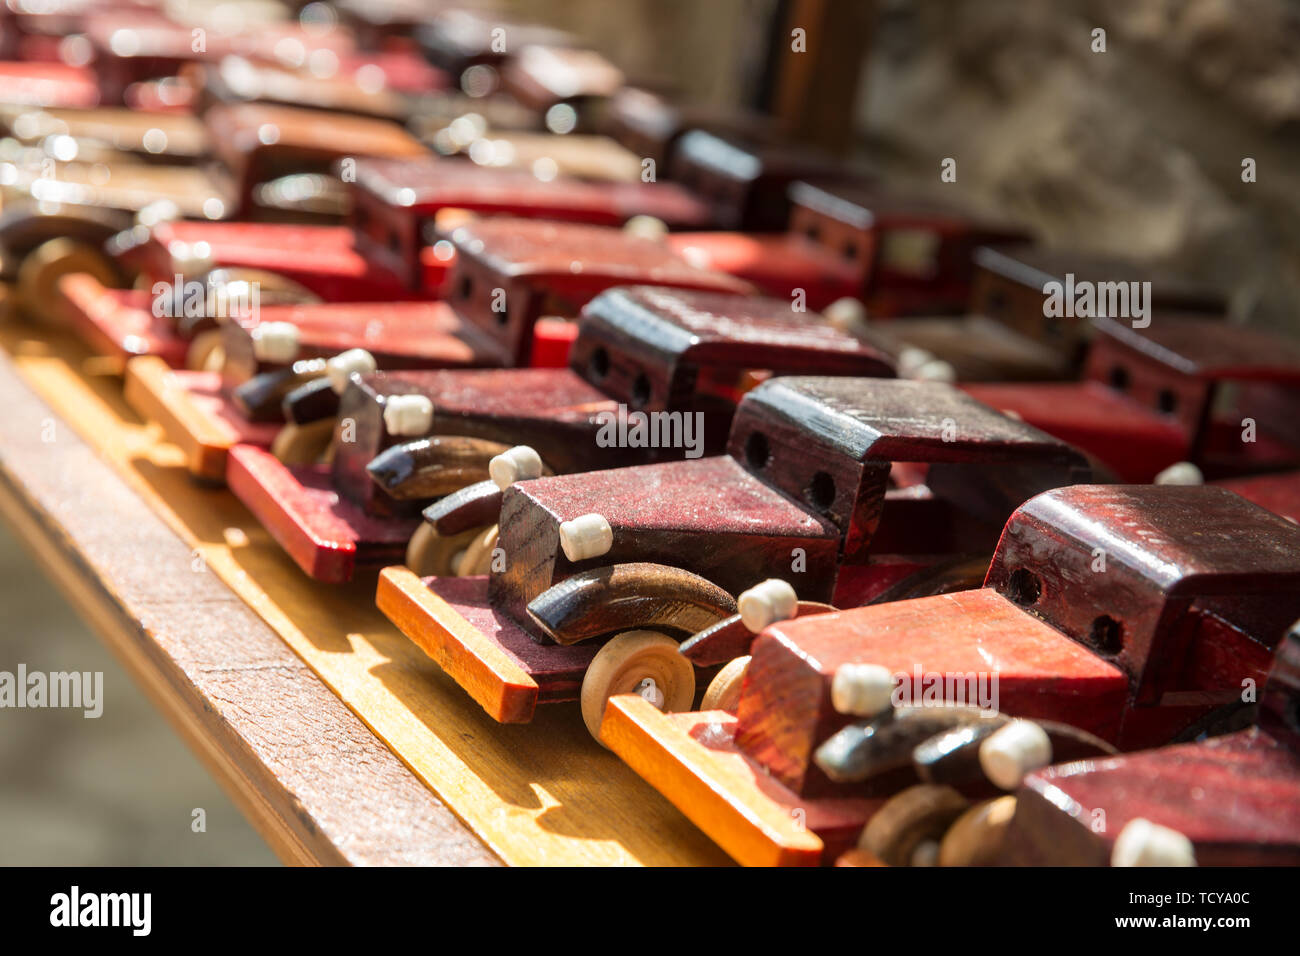 Souvenirs from Lagich. Wooden toys, retro old cars. Sale of Souvenirs for tourists. Stock Photo